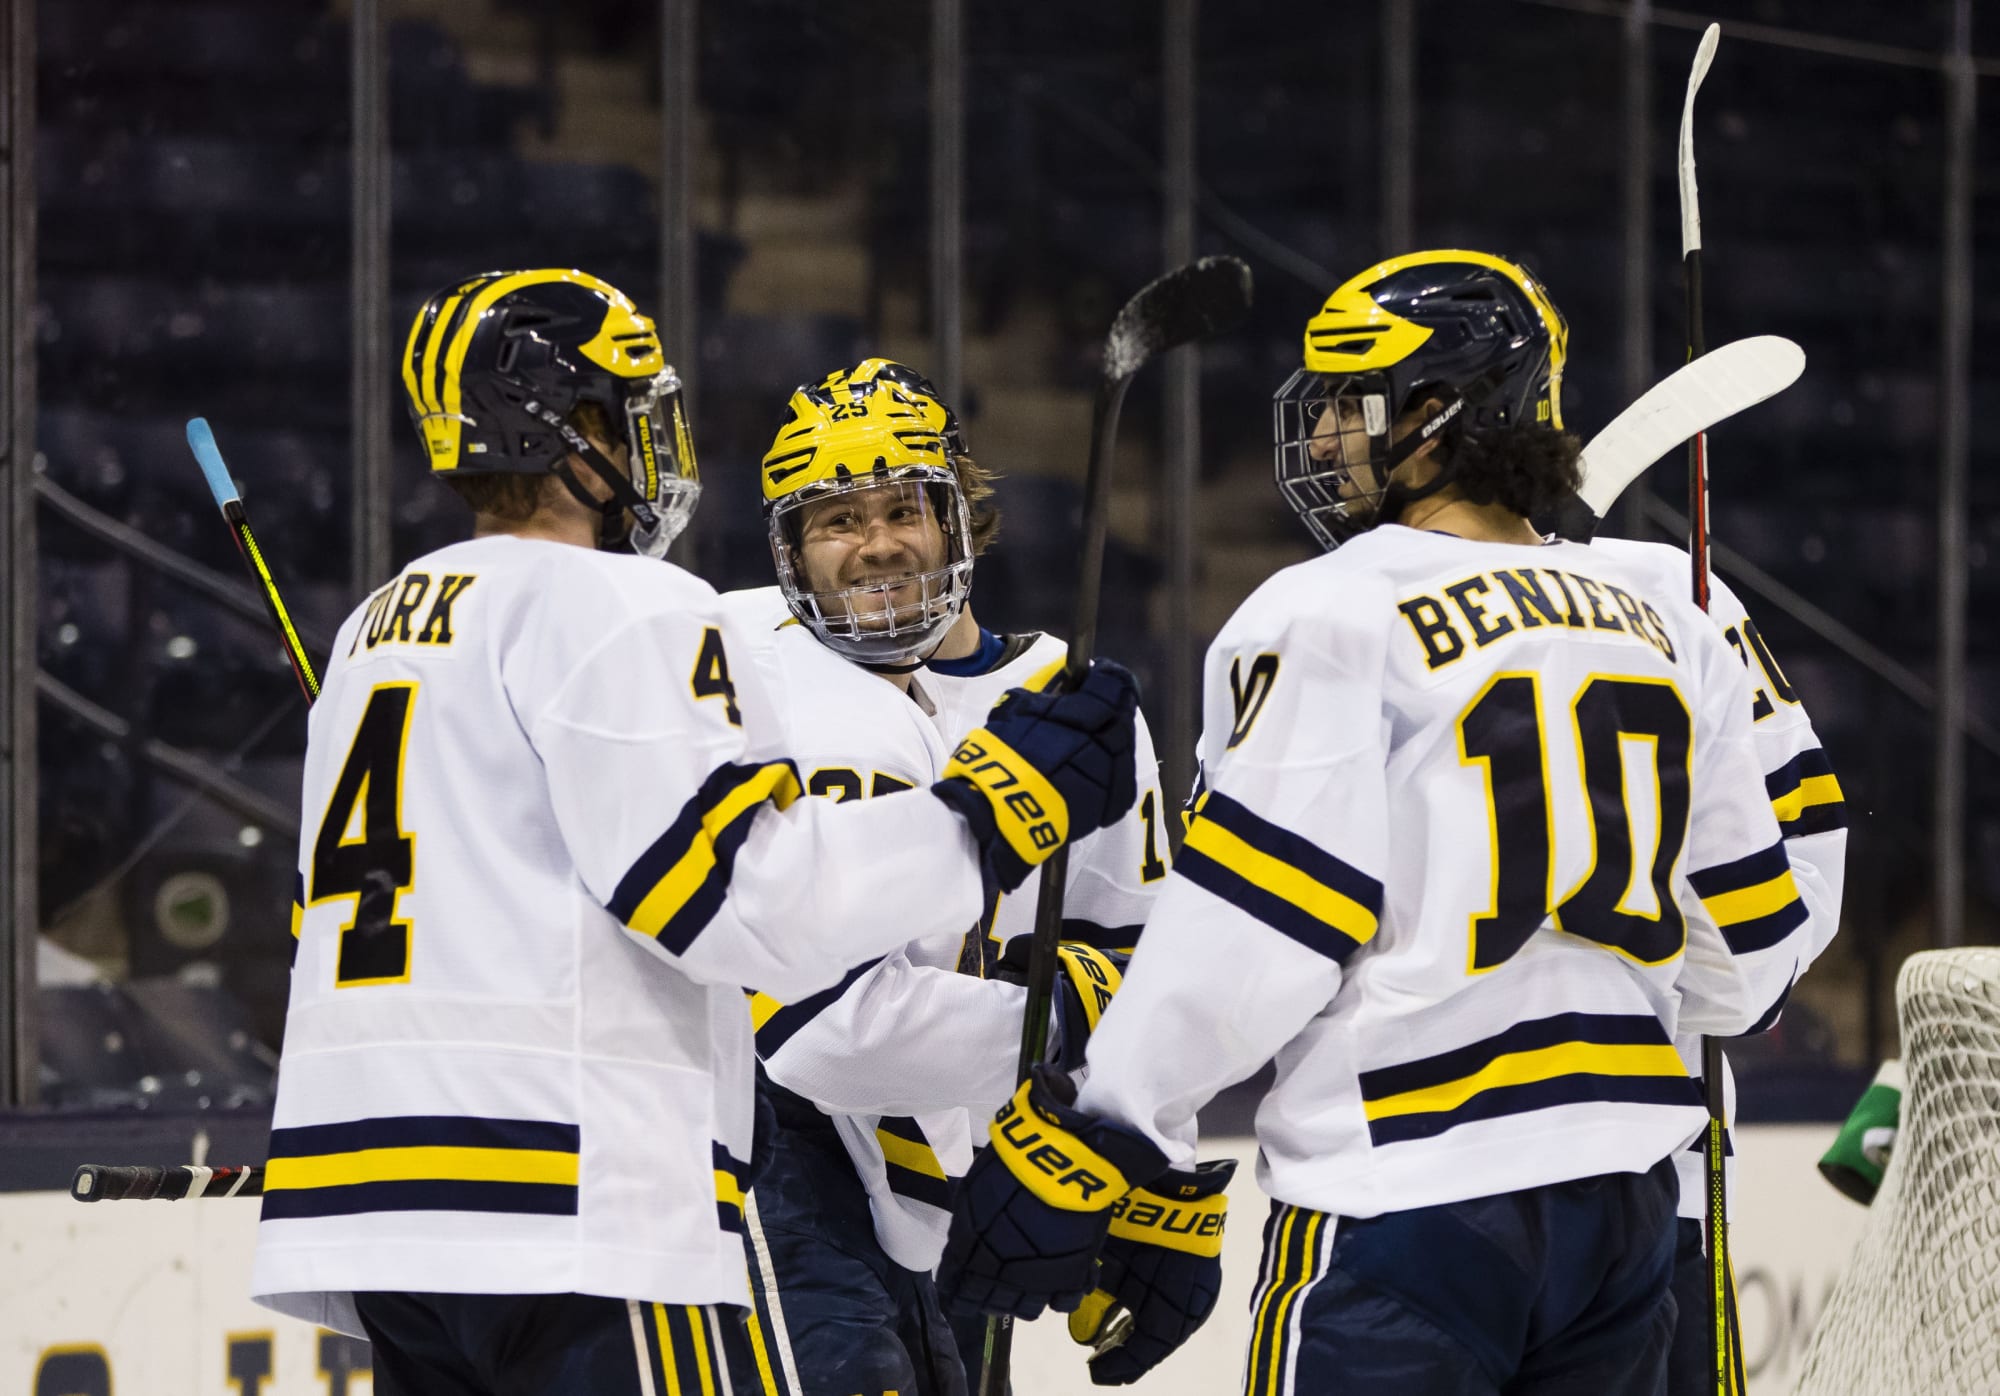 Michigan Hockey chasing after the No.1 ranking heading into 2022